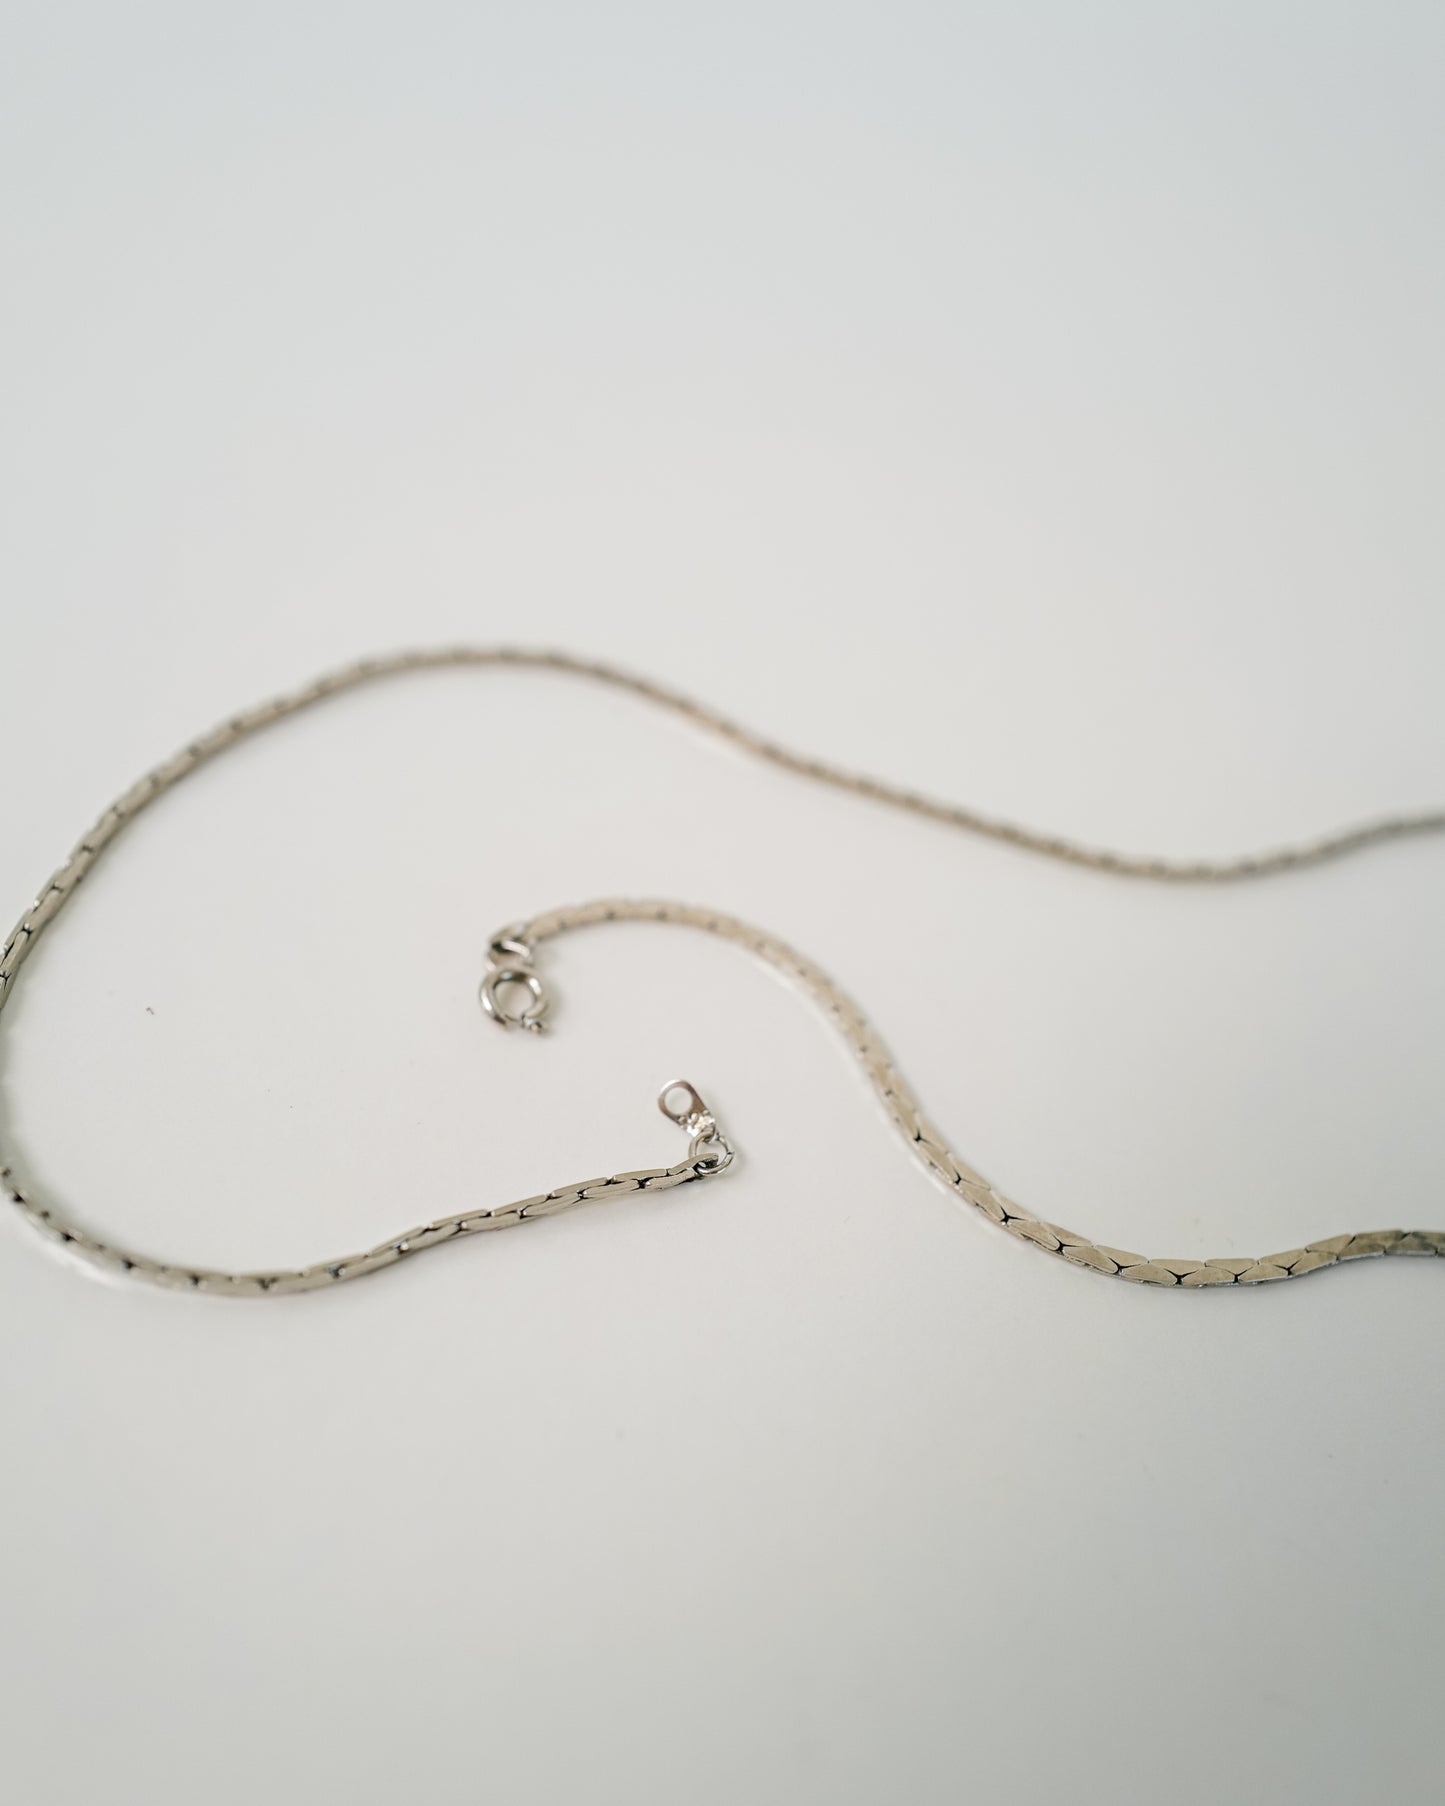 Vintage Sterling 925 Silver Chains - 19in and 24in